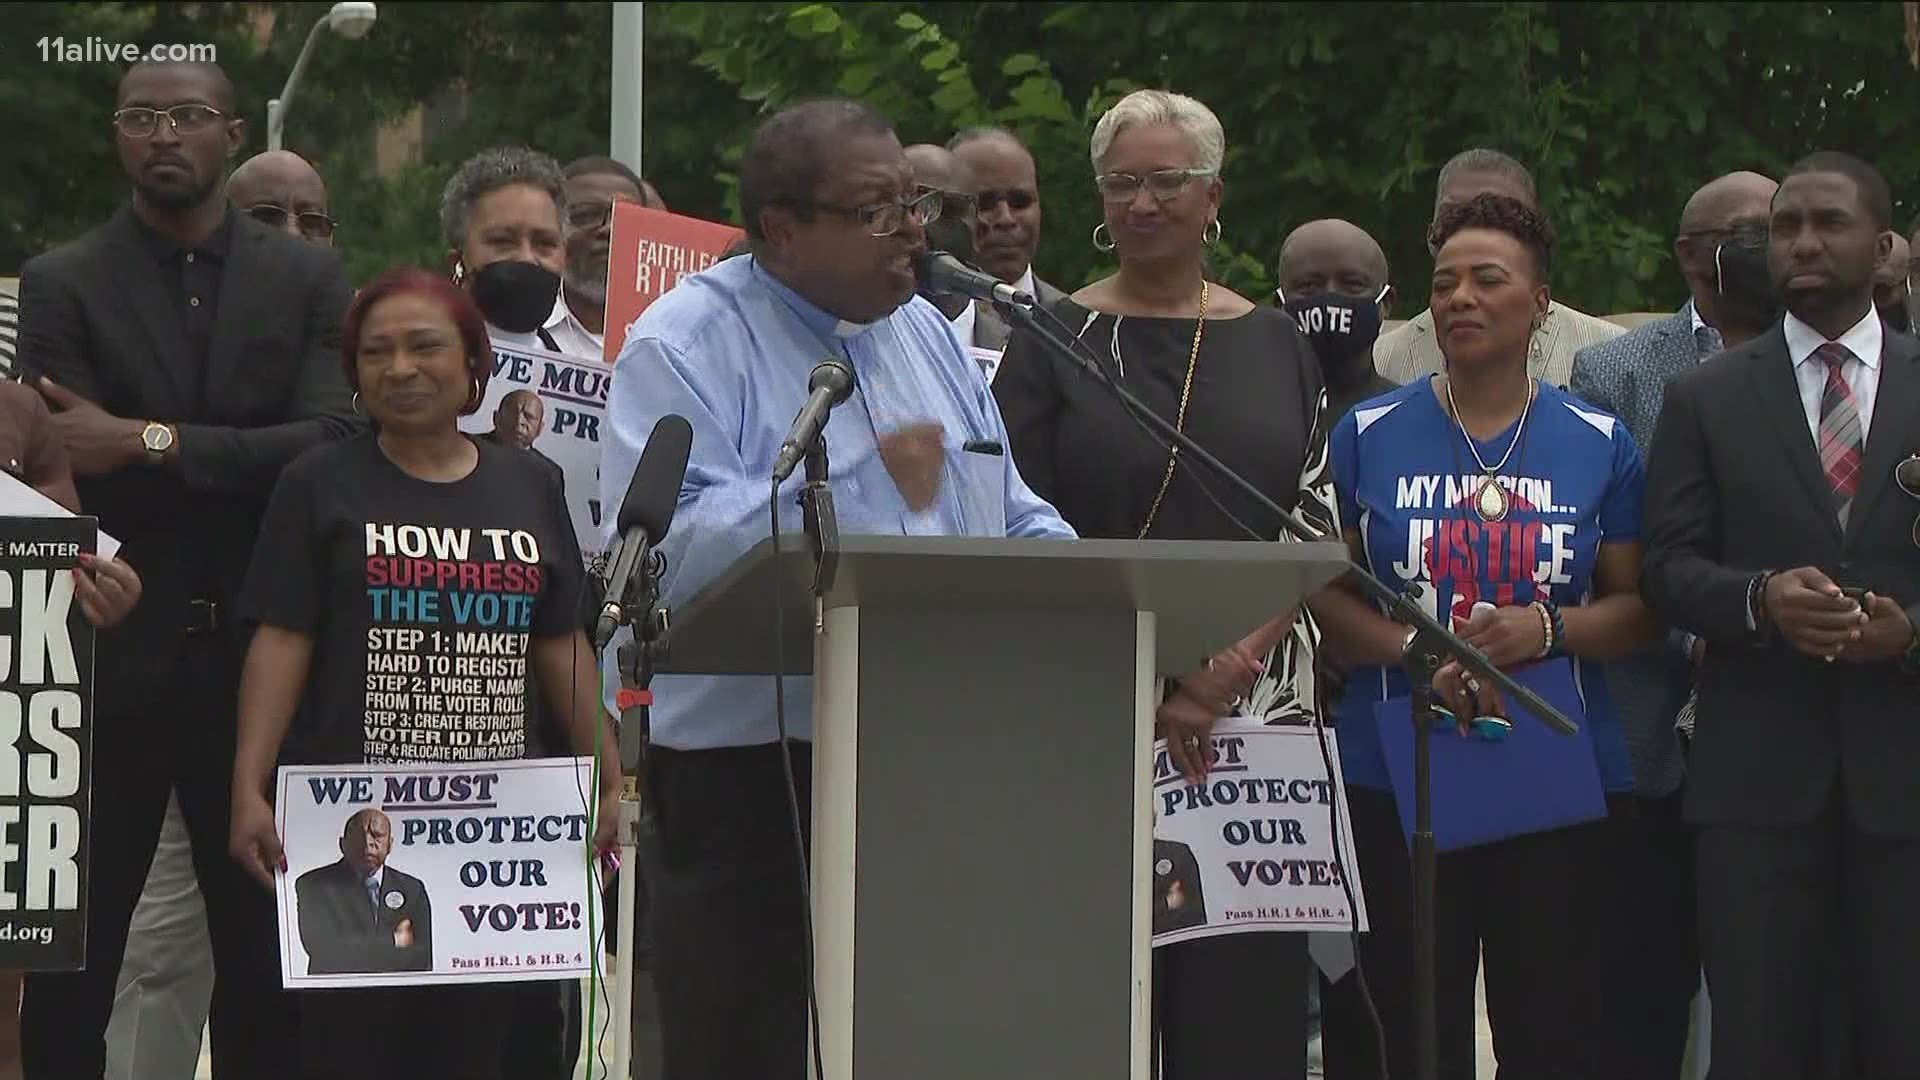 Georgia faith leaders gathered at the Capitol for a prayer rally condemning the controversial voting law signed by Gov. Kemp earlier this year.